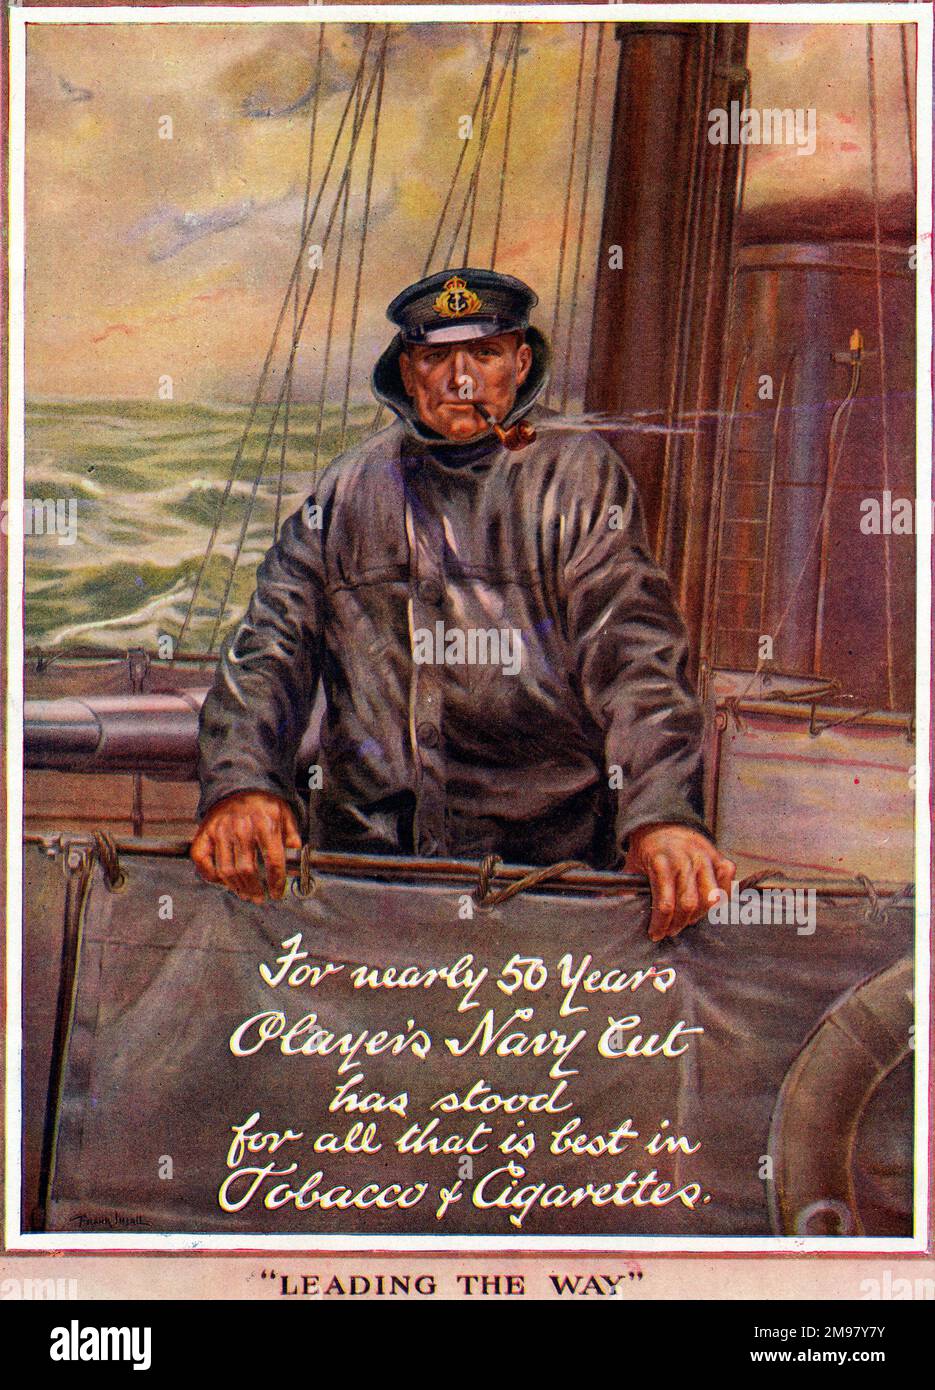 Advertisement for Player's Navy Cut tobacco and cigarettes, showing sailor on the deck of a ship, smoking a pipe -- Leading The Way. Stock Photo